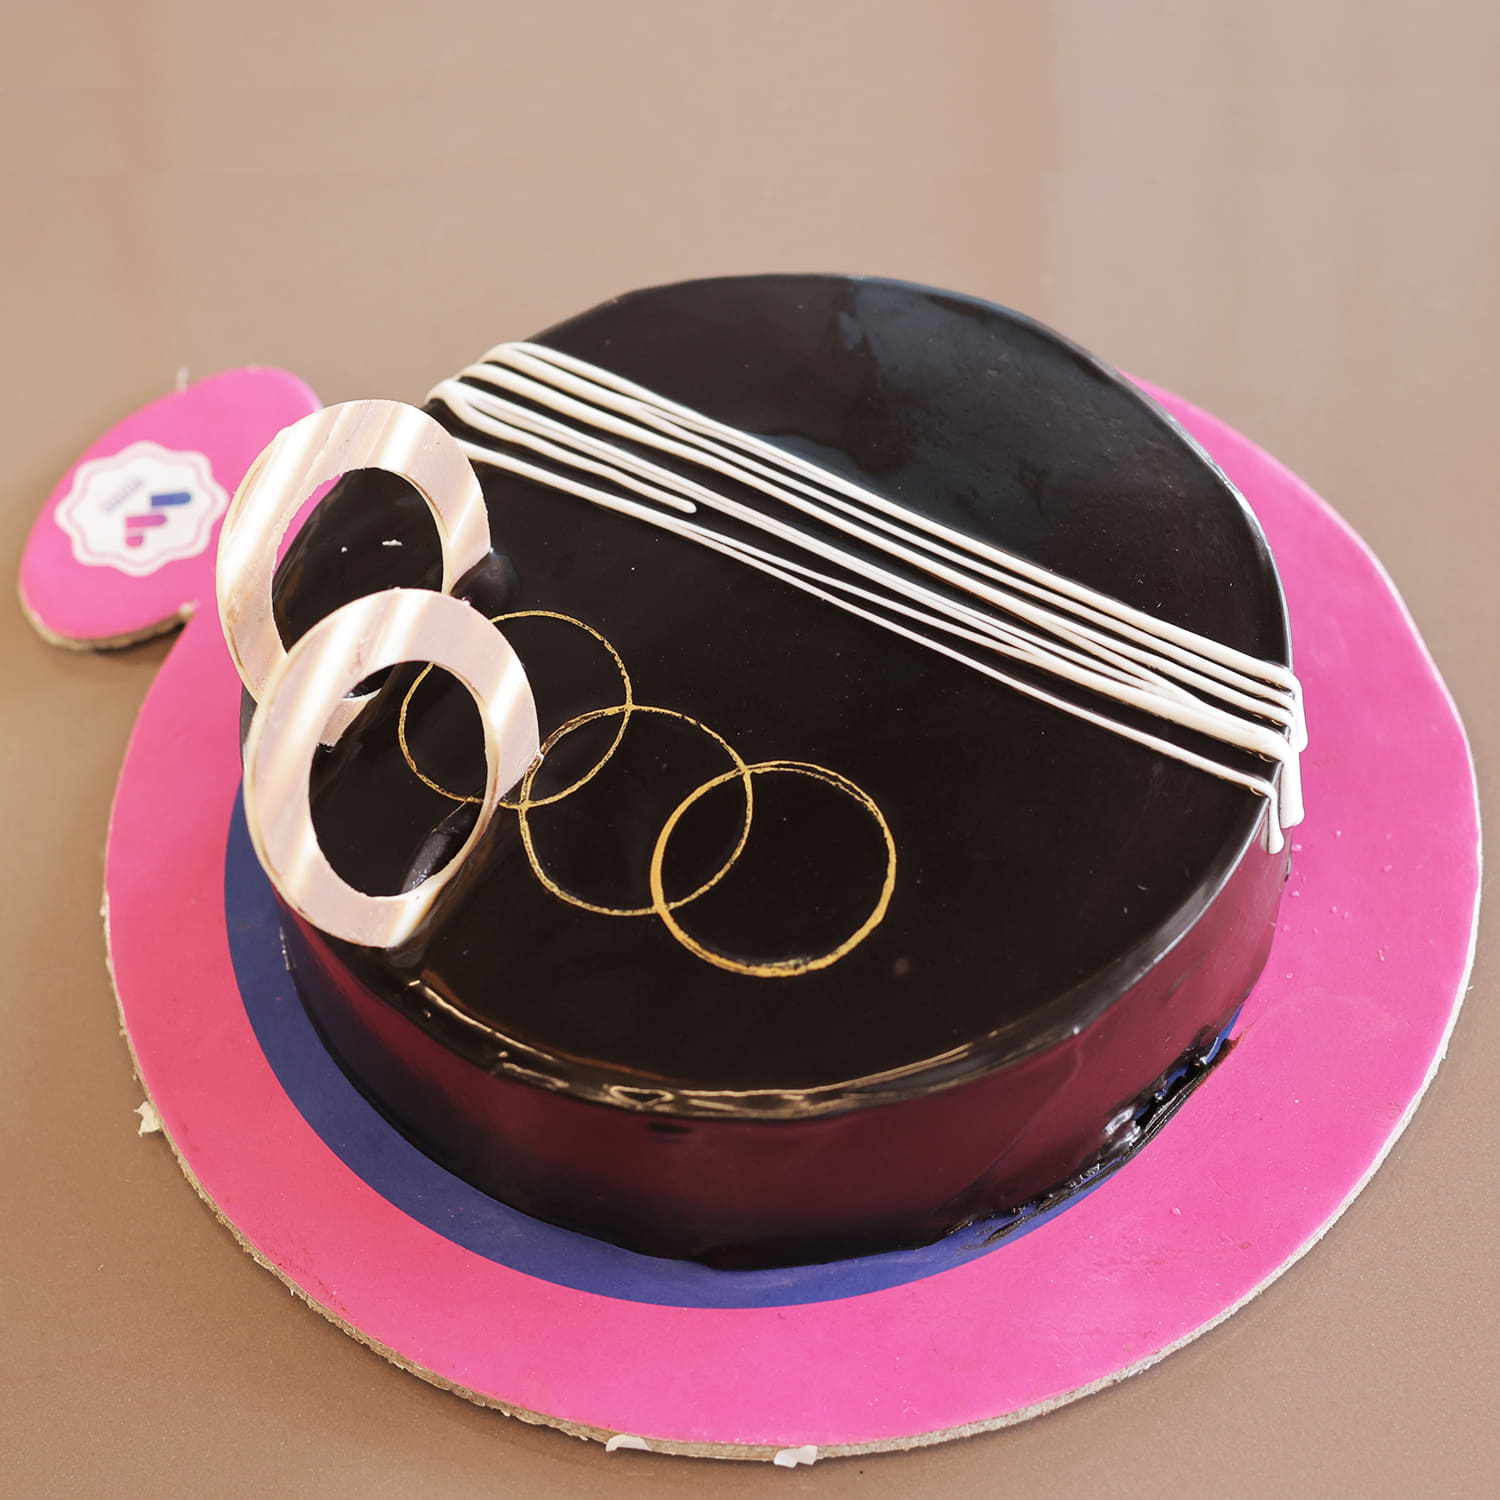 Surprise your loved ones with a birthday cake | by Giftz Bag | Medium